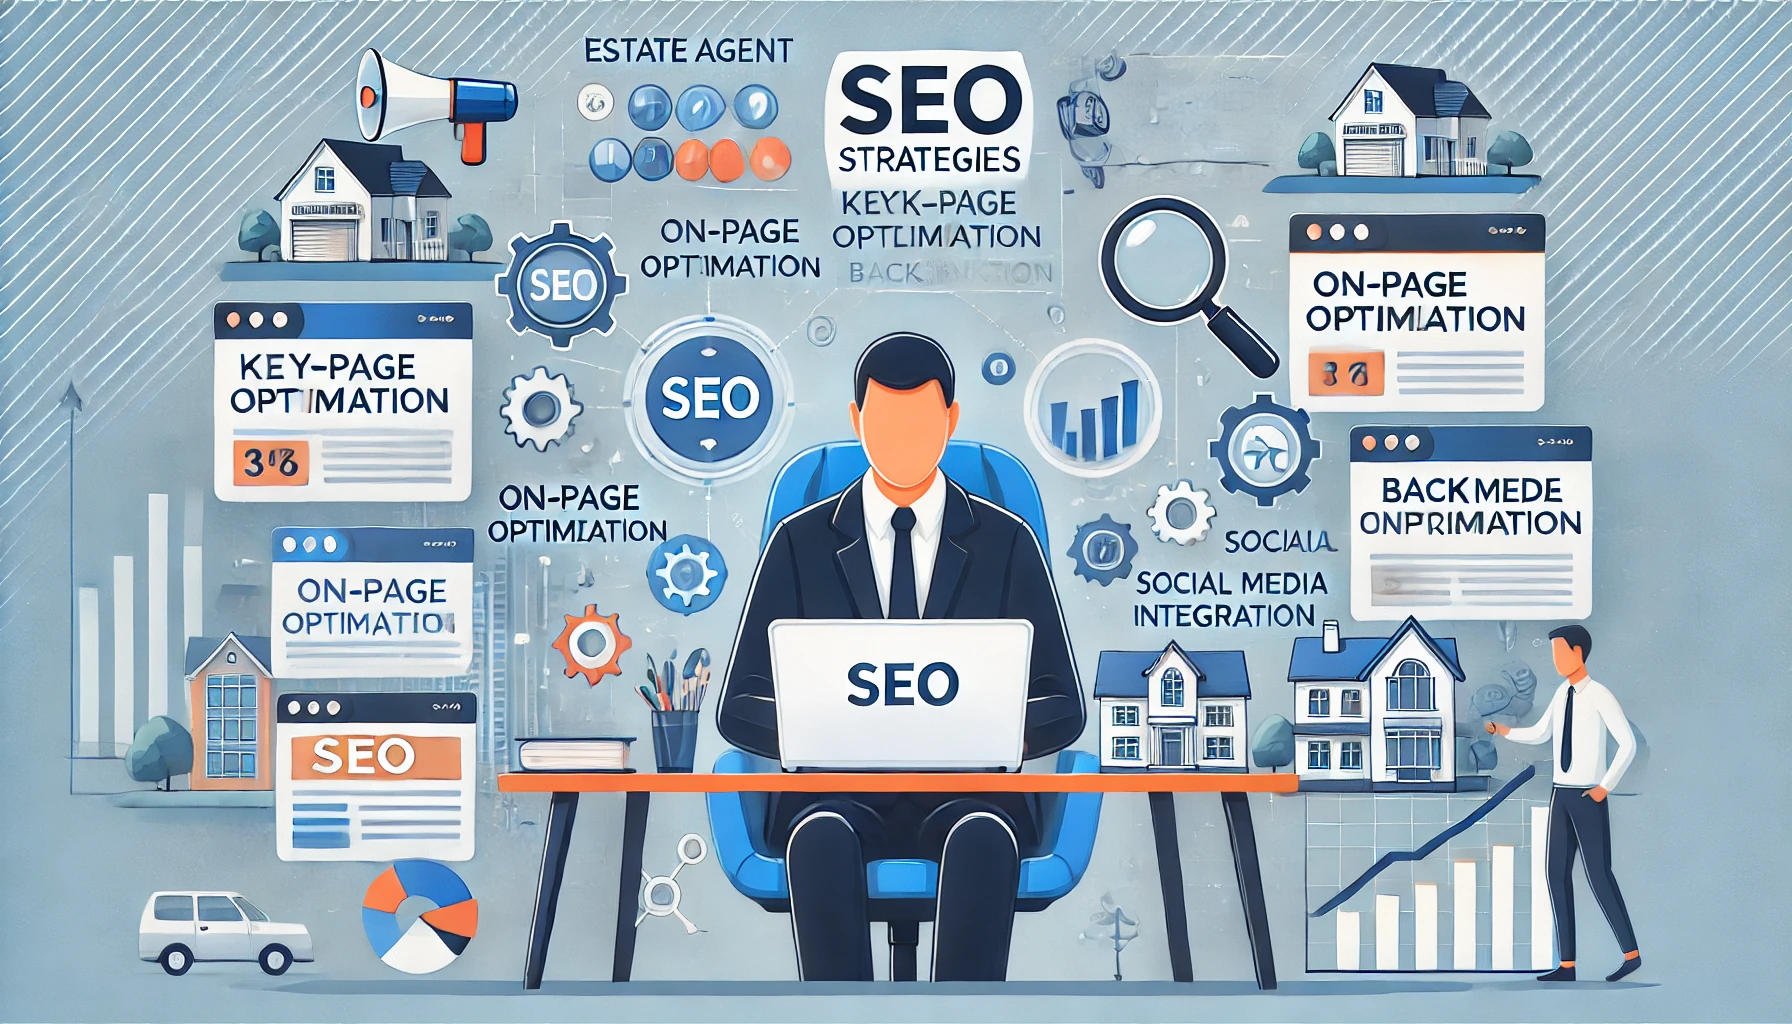 How To Use Real Estate SEO For Lead Generation